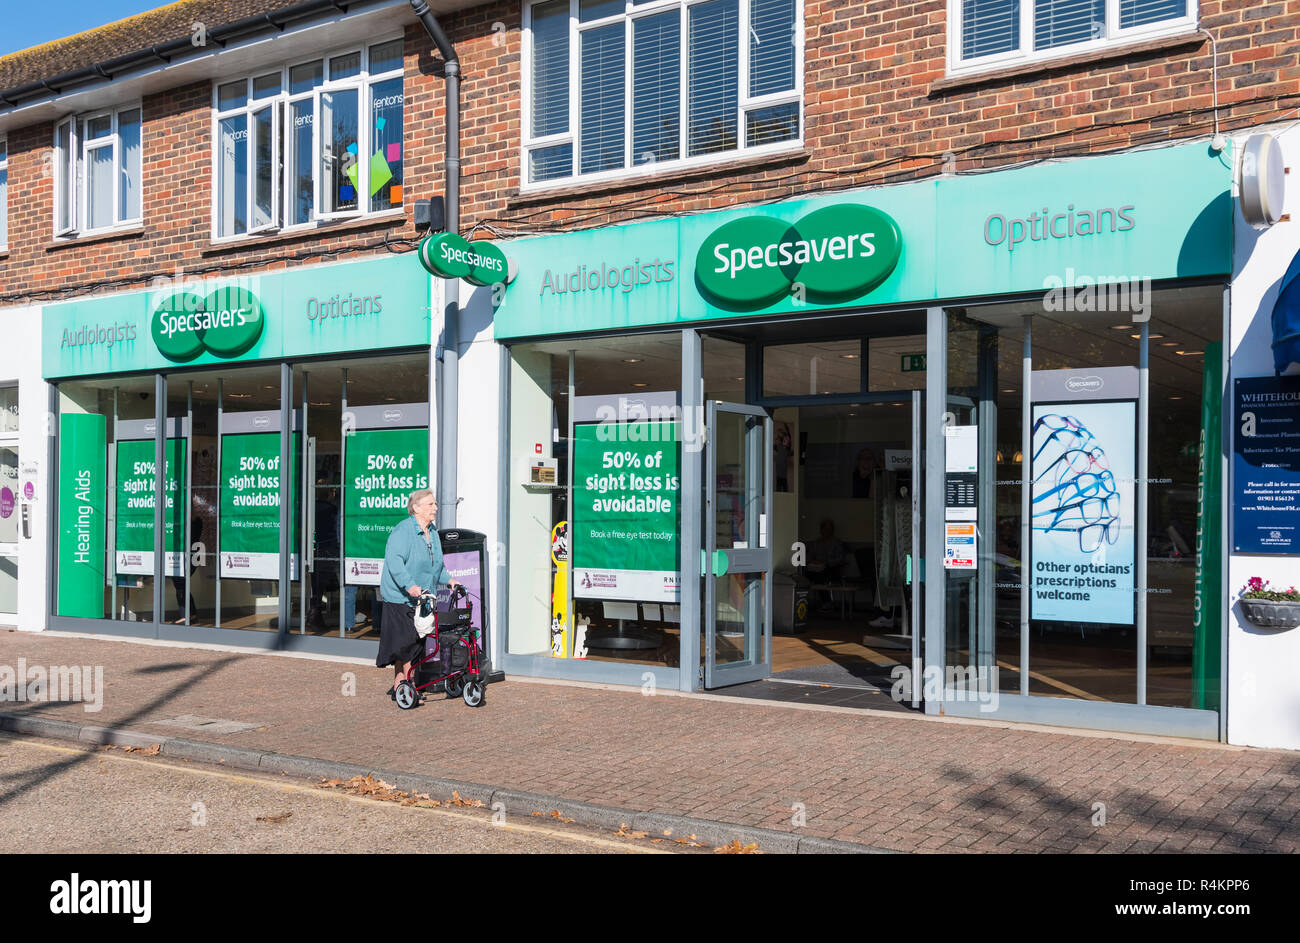 Specsavers Audiologists and Opticians shop front entrance in Rustington, West Sussex, England, UK. Stock Photo